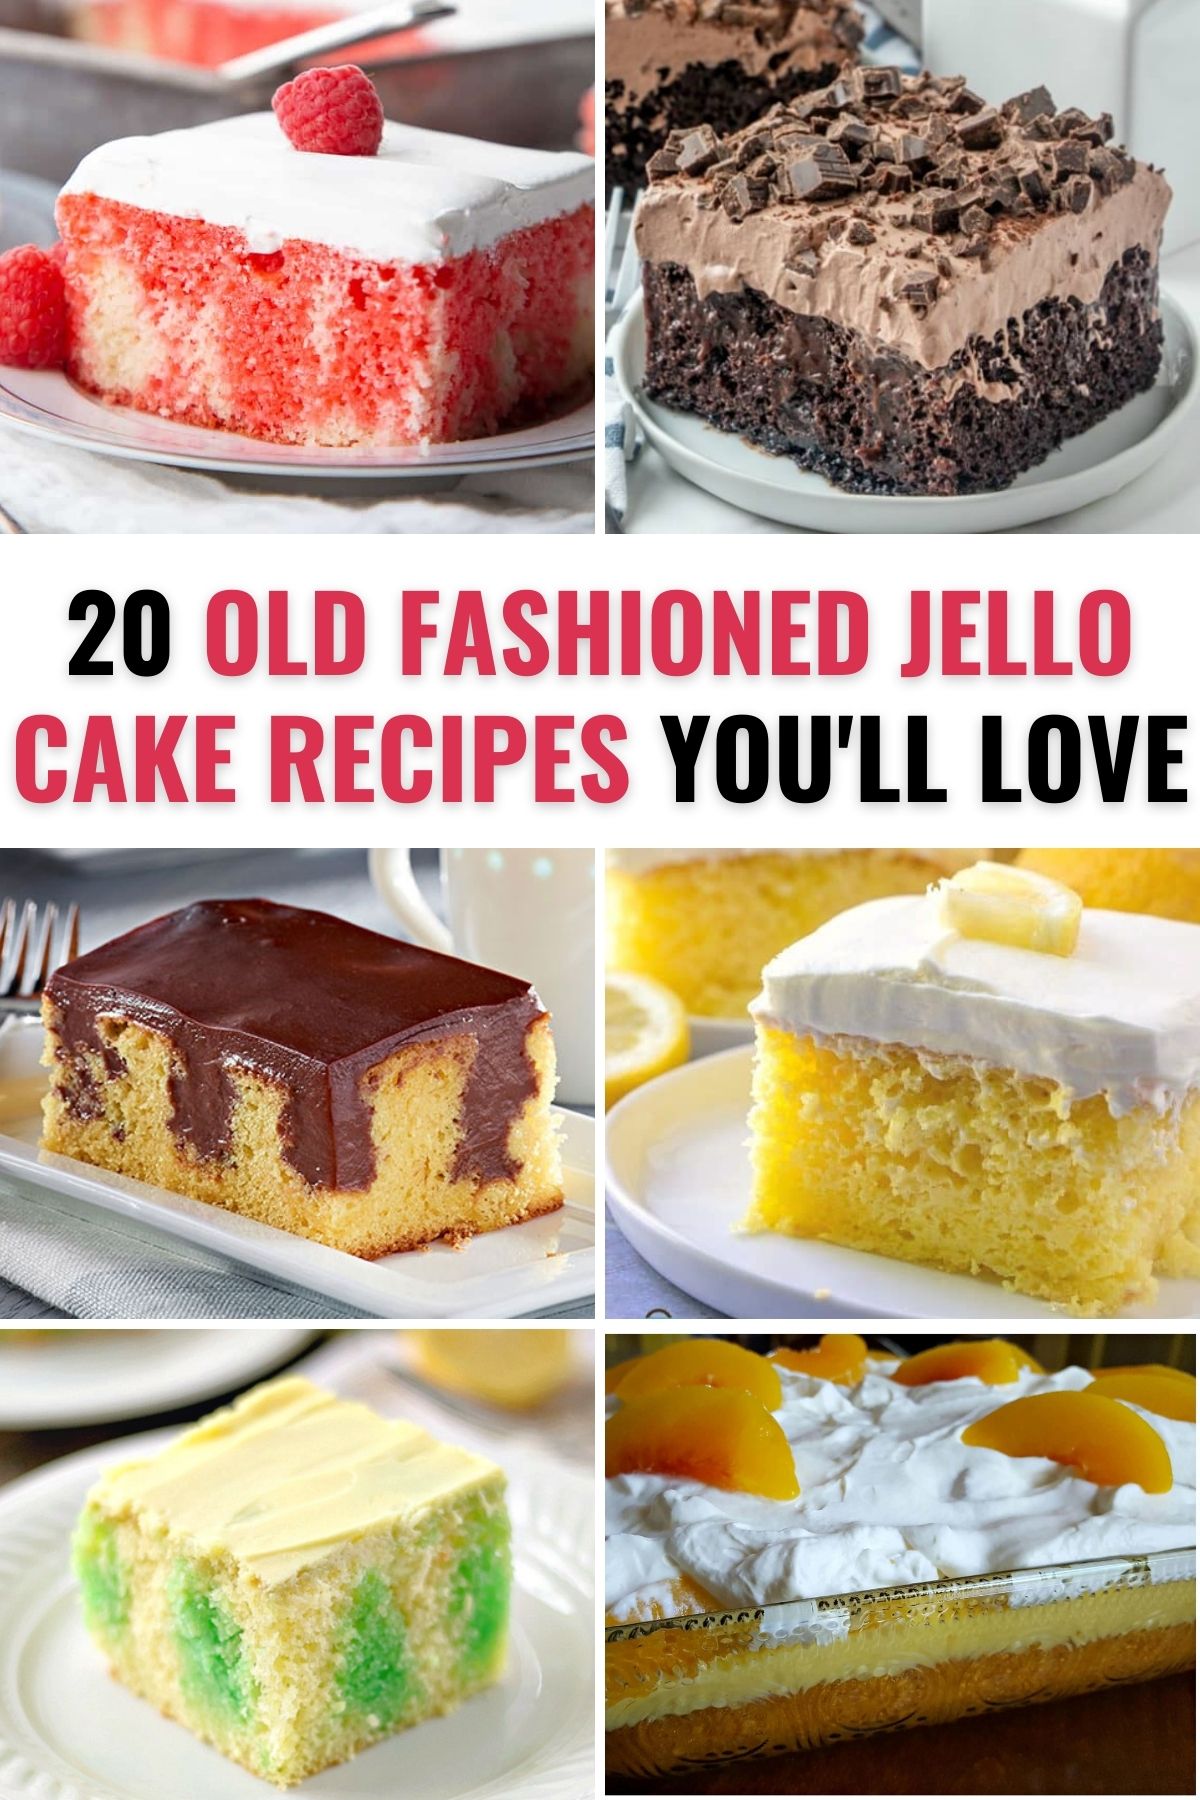 A collection of old fashioned jello cake recipes.